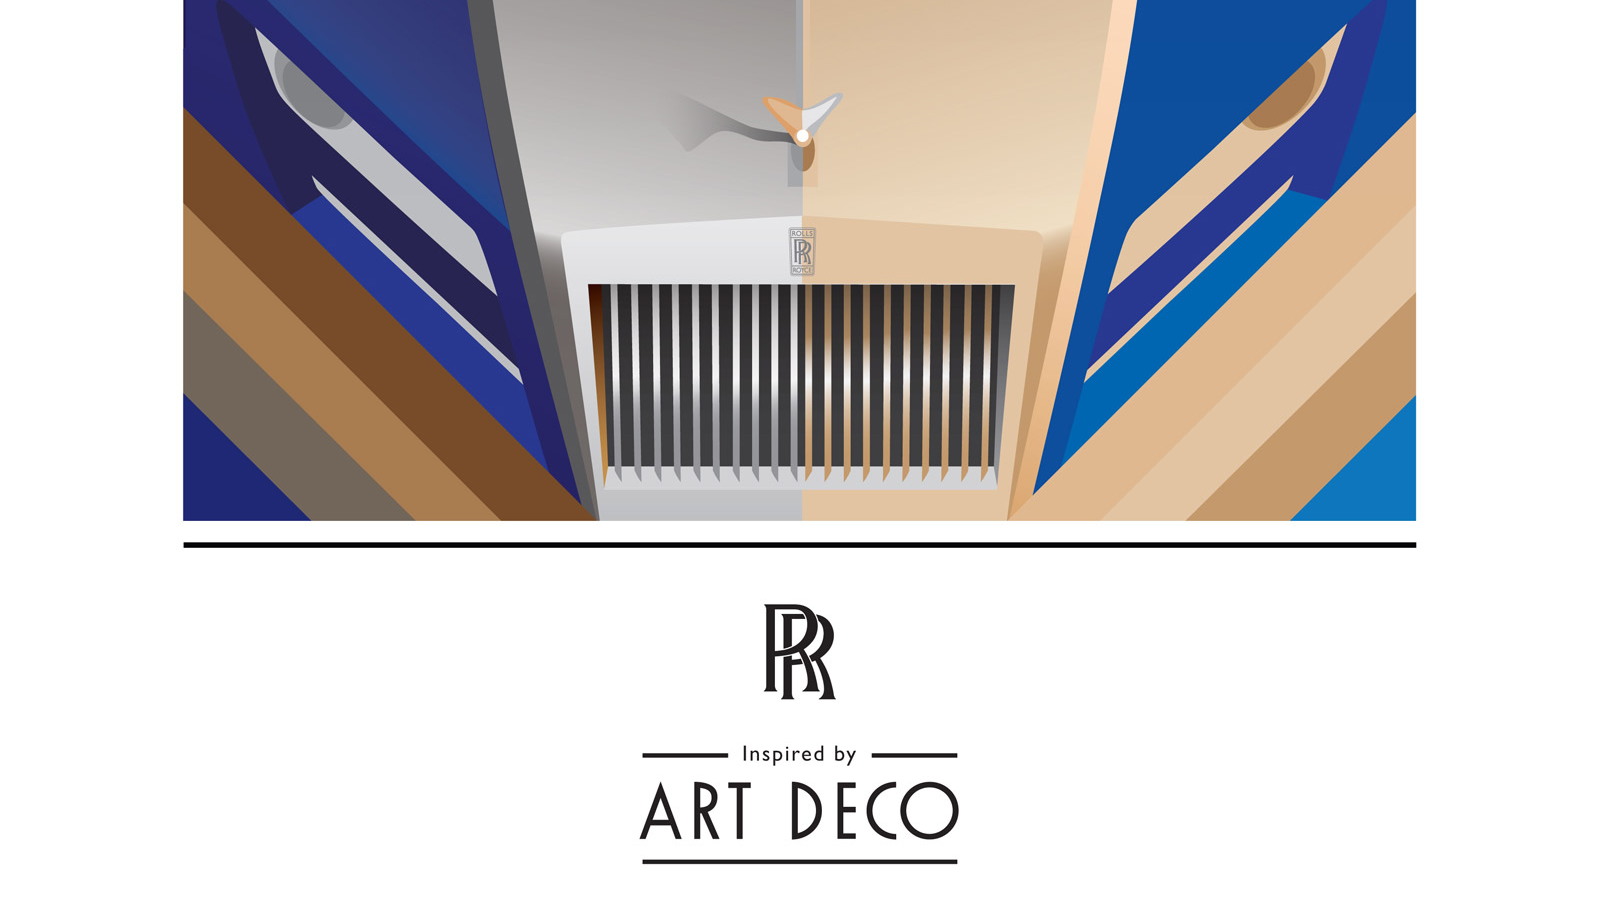 Rolls-Royce to unveil Art Deco-inspired cars at 2012 Paris Auto Show